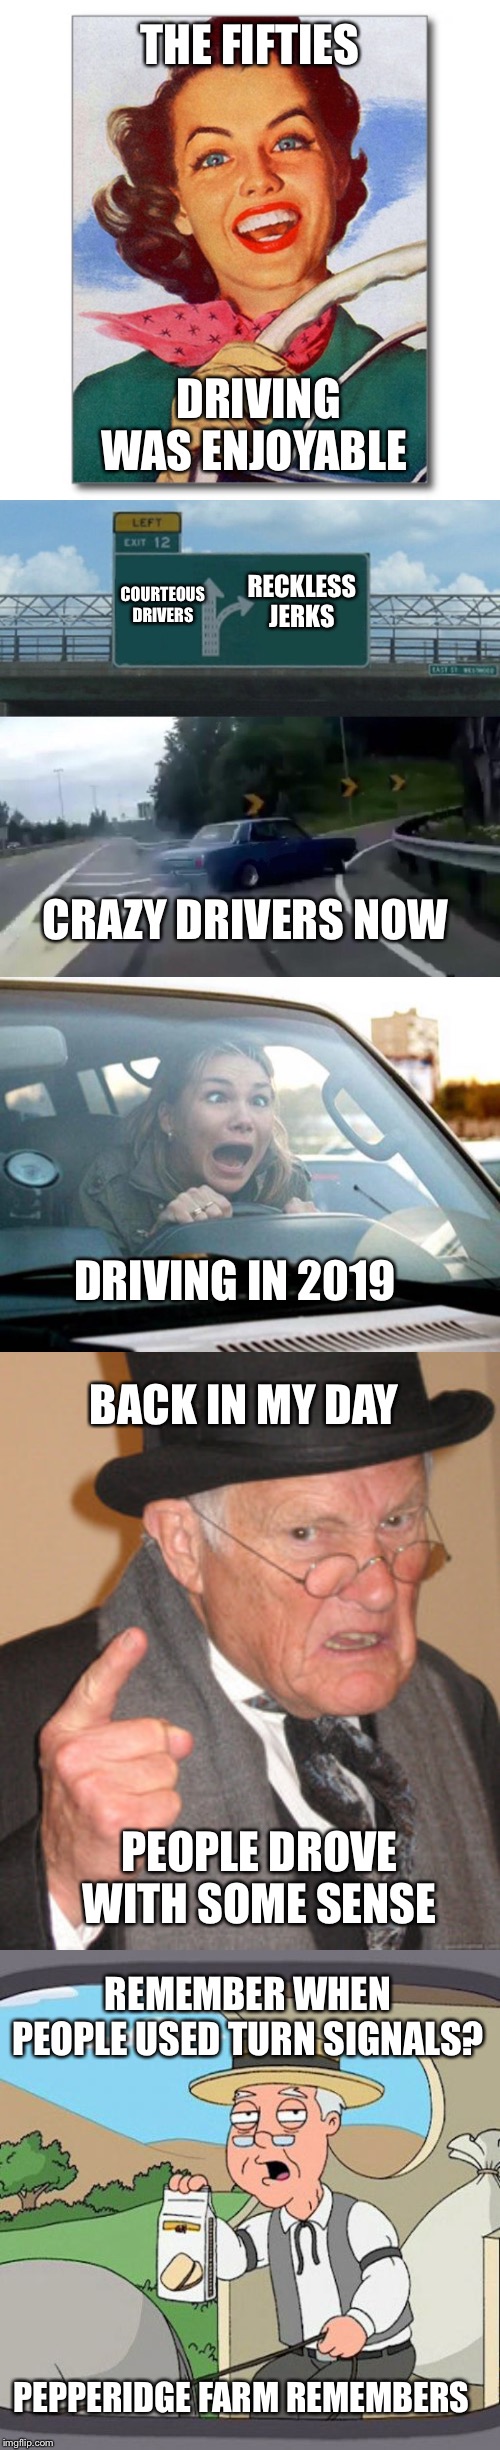 Smart Phones & Smart Cars = Dumb Drivers |  THE FIFTIES; DRIVING WAS ENJOYABLE; RECKLESS JERKS; COURTEOUS DRIVERS; CRAZY DRIVERS NOW; DRIVING IN 2019; BACK IN MY DAY; PEOPLE DROVE WITH SOME SENSE; REMEMBER WHEN PEOPLE USED TURN SIGNALS? PEPPERIDGE FARM REMEMBERS | image tagged in memes,back in my day,pepperidge farm remembers,woman driver,vintage '50s woman driver,left exit 12 off ramp | made w/ Imgflip meme maker